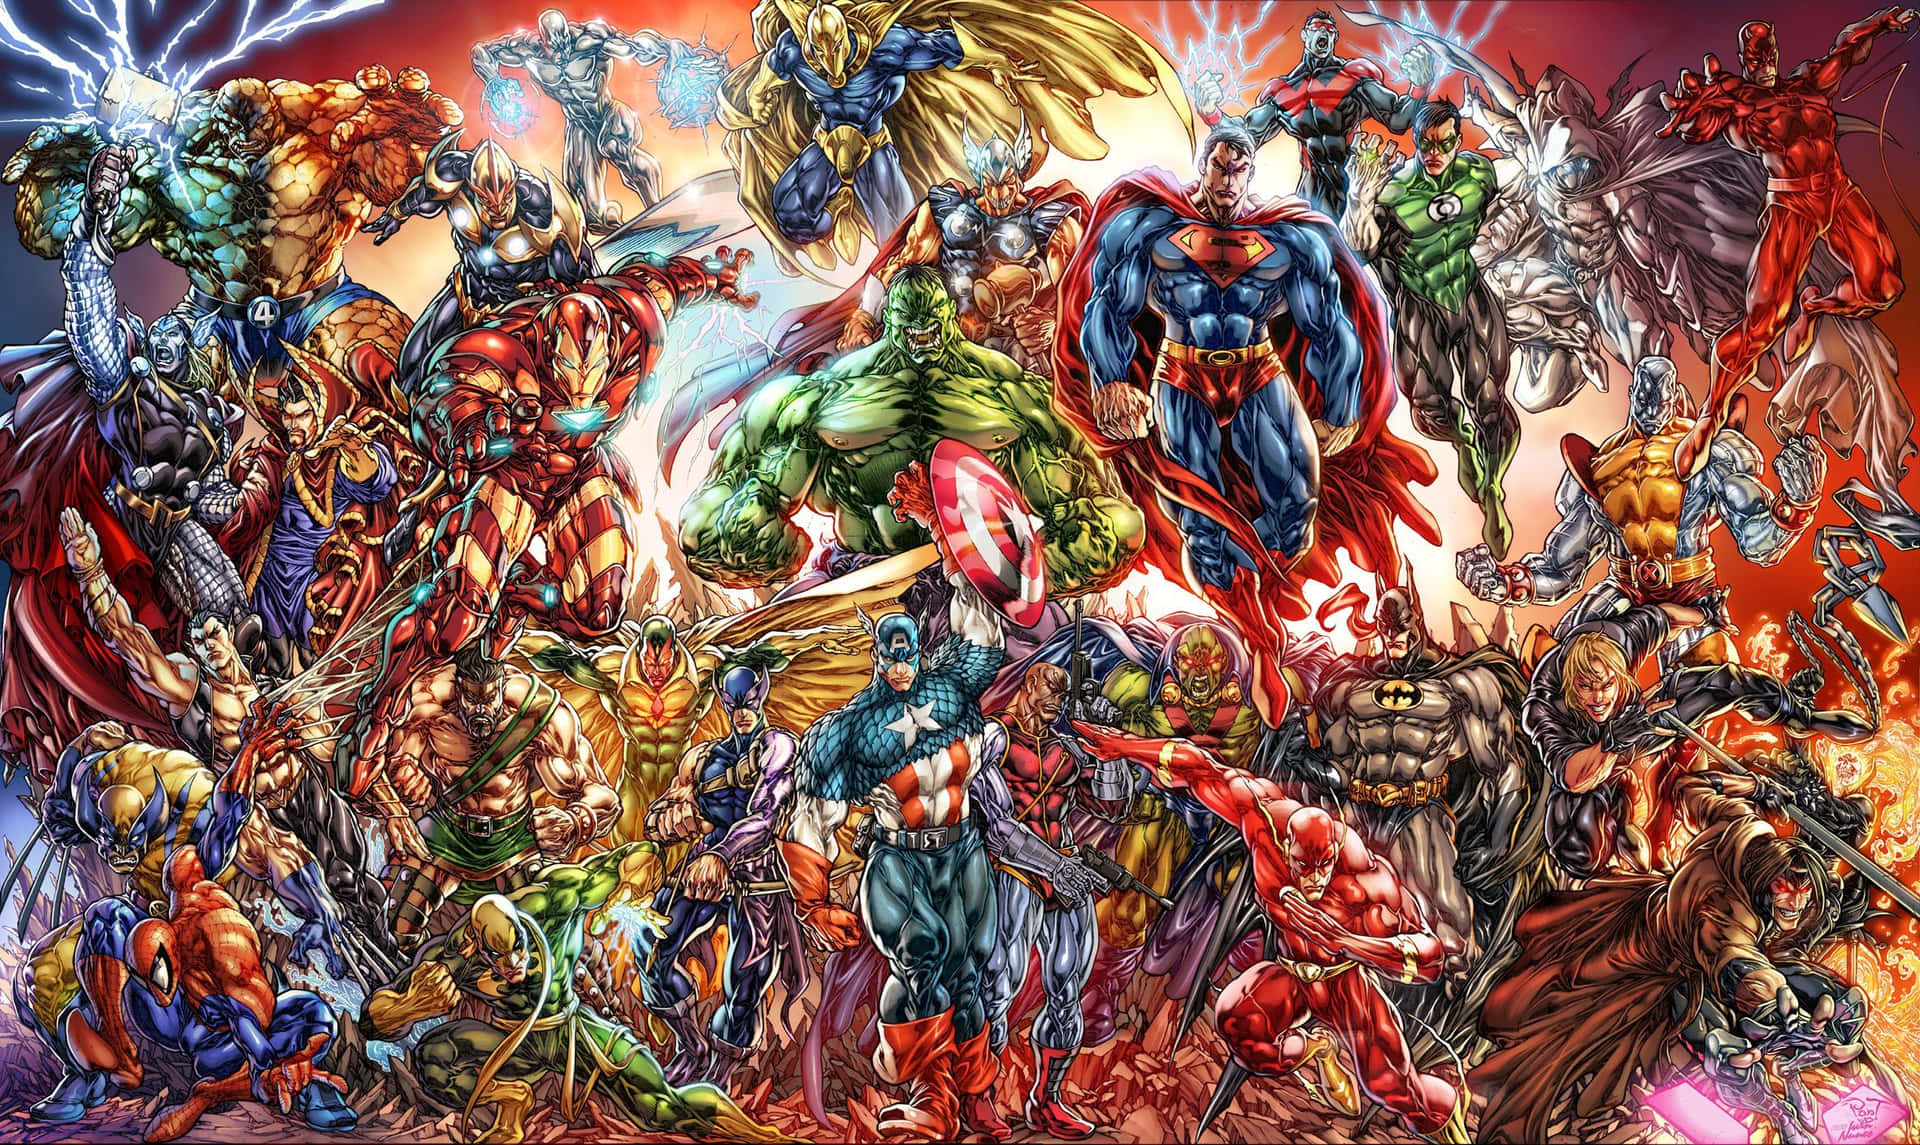 Crossover Of Marvel And DC Superhero Collage Wallpaper